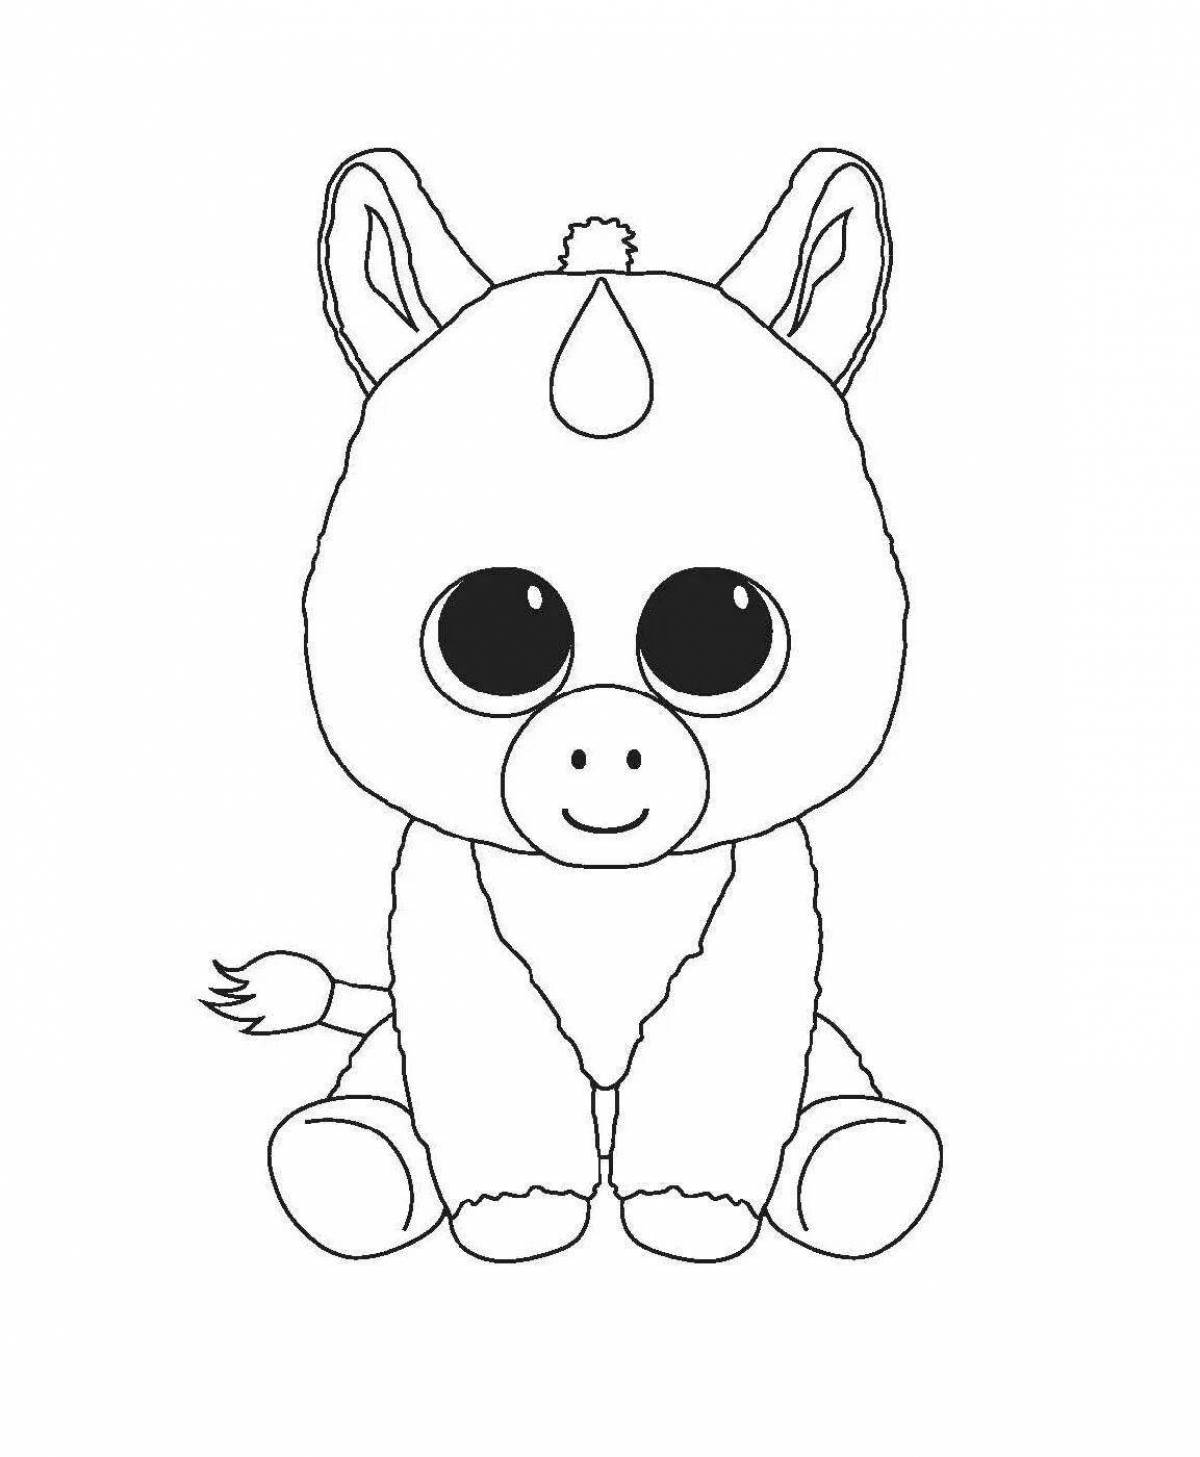 Coloring soft toys